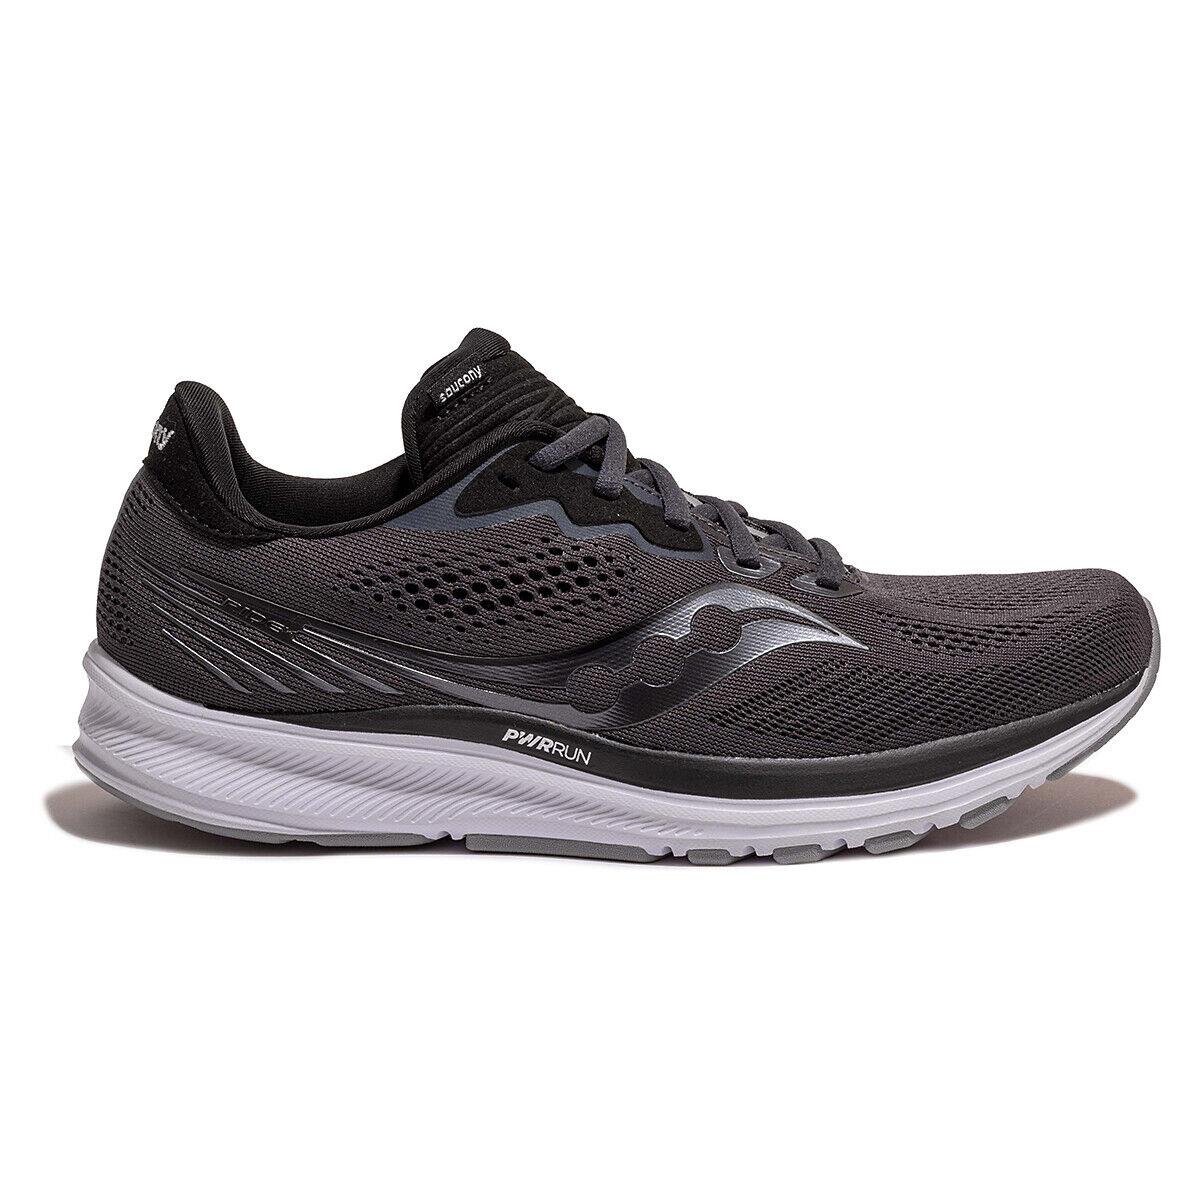 Saucony Mens Ride 14 Black Running Shoes Lace Up Low Top Sizes 7-14